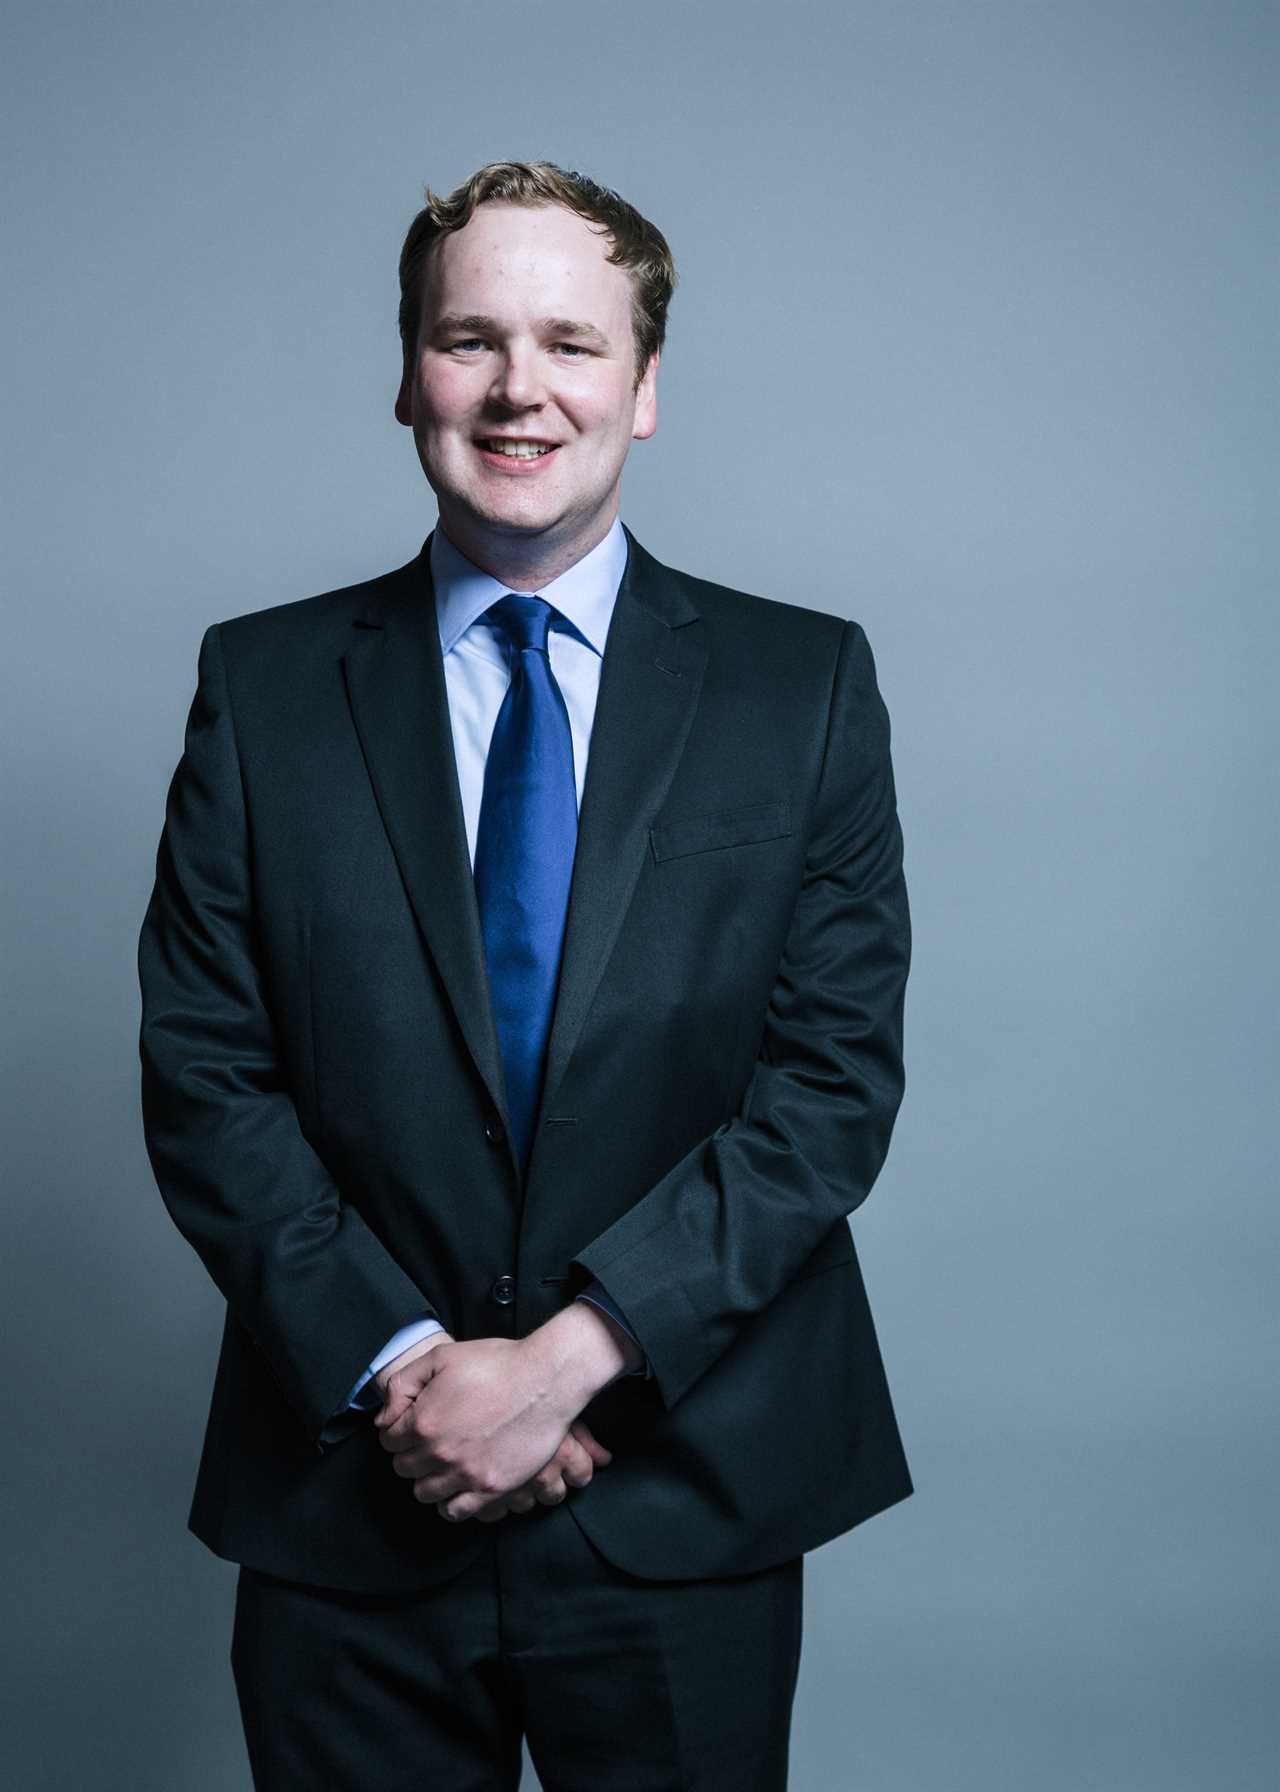 Top Tory MP William Wragg announces short break from work as he battles mental health difficulties